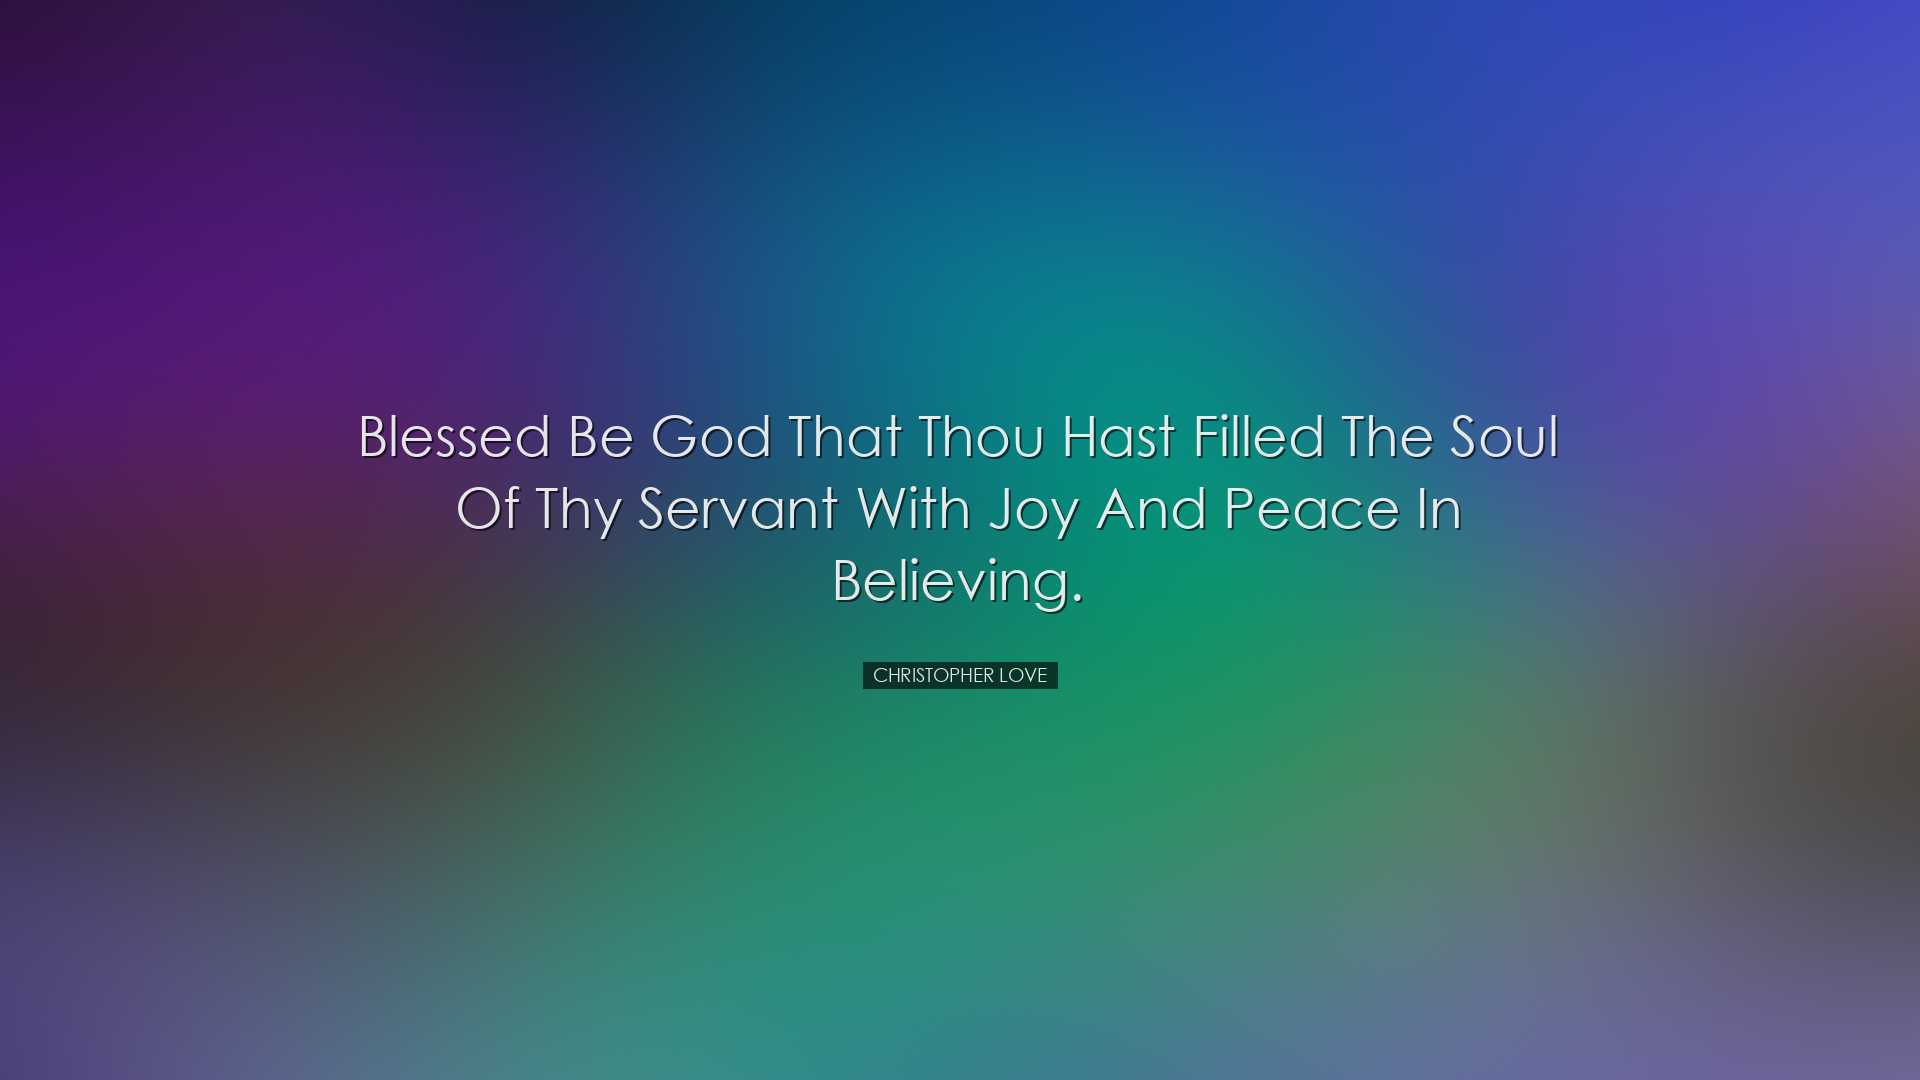 Blessed be God that Thou hast filled the soul of Thy servant with